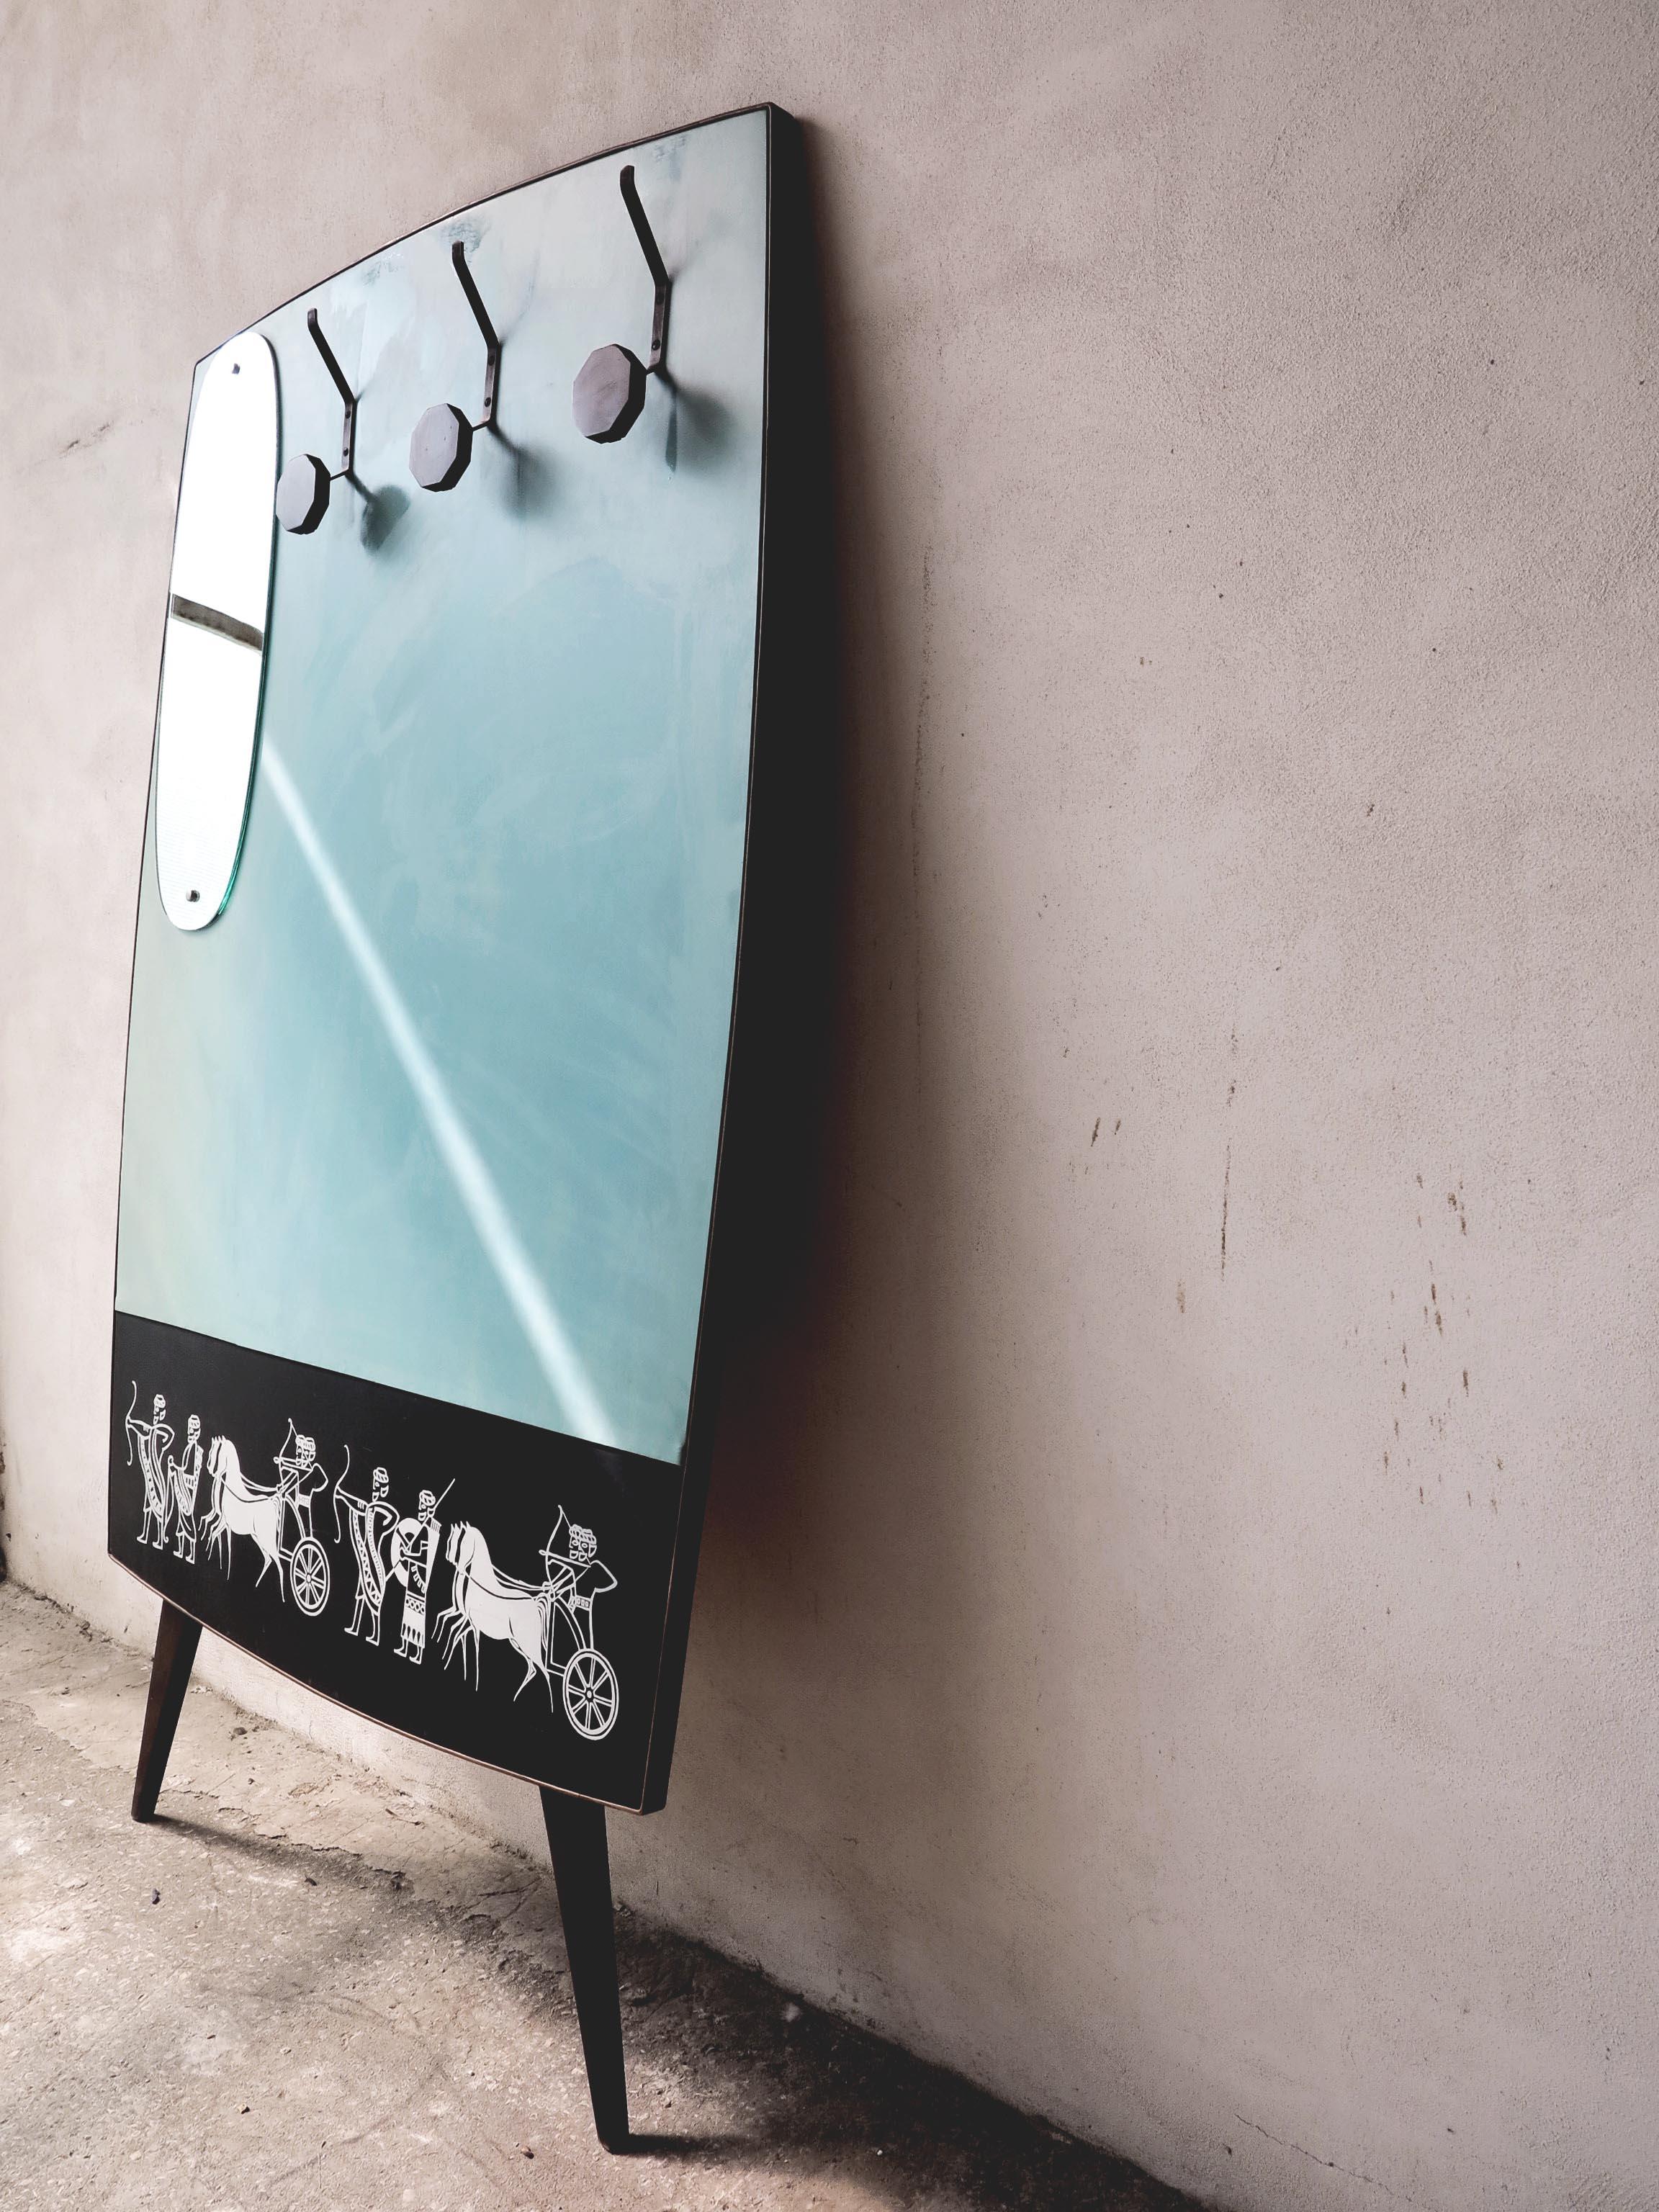 Coat Rack with Mirror and Persian Motif on Original Eco-Friendly Leather, 1950s (Italienisch)